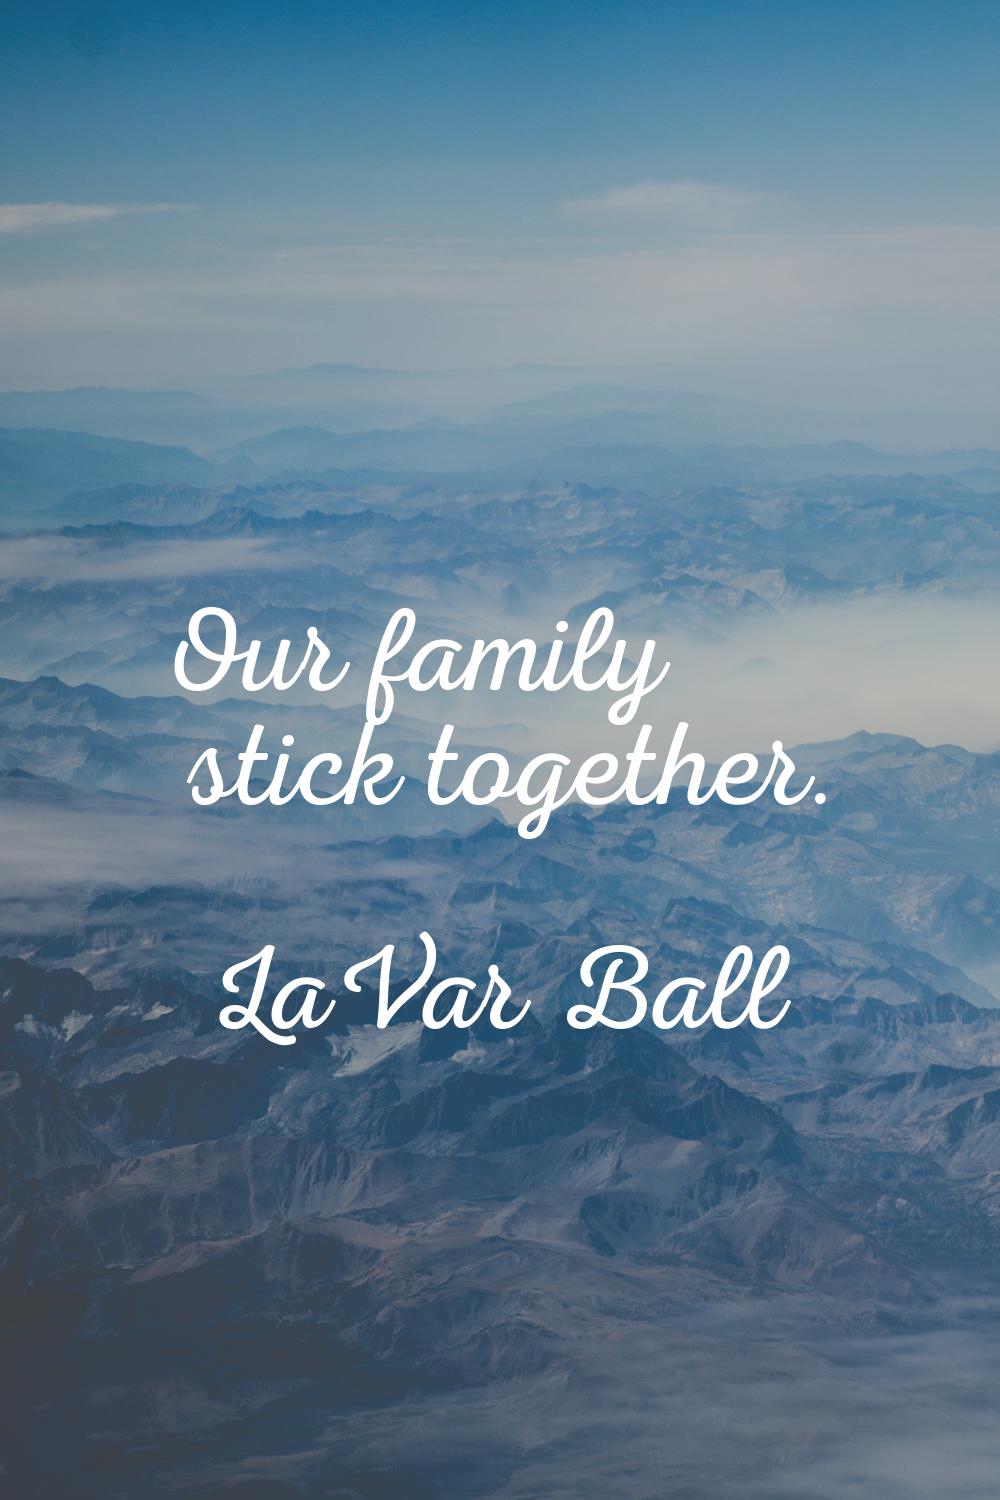 Our family stick together.